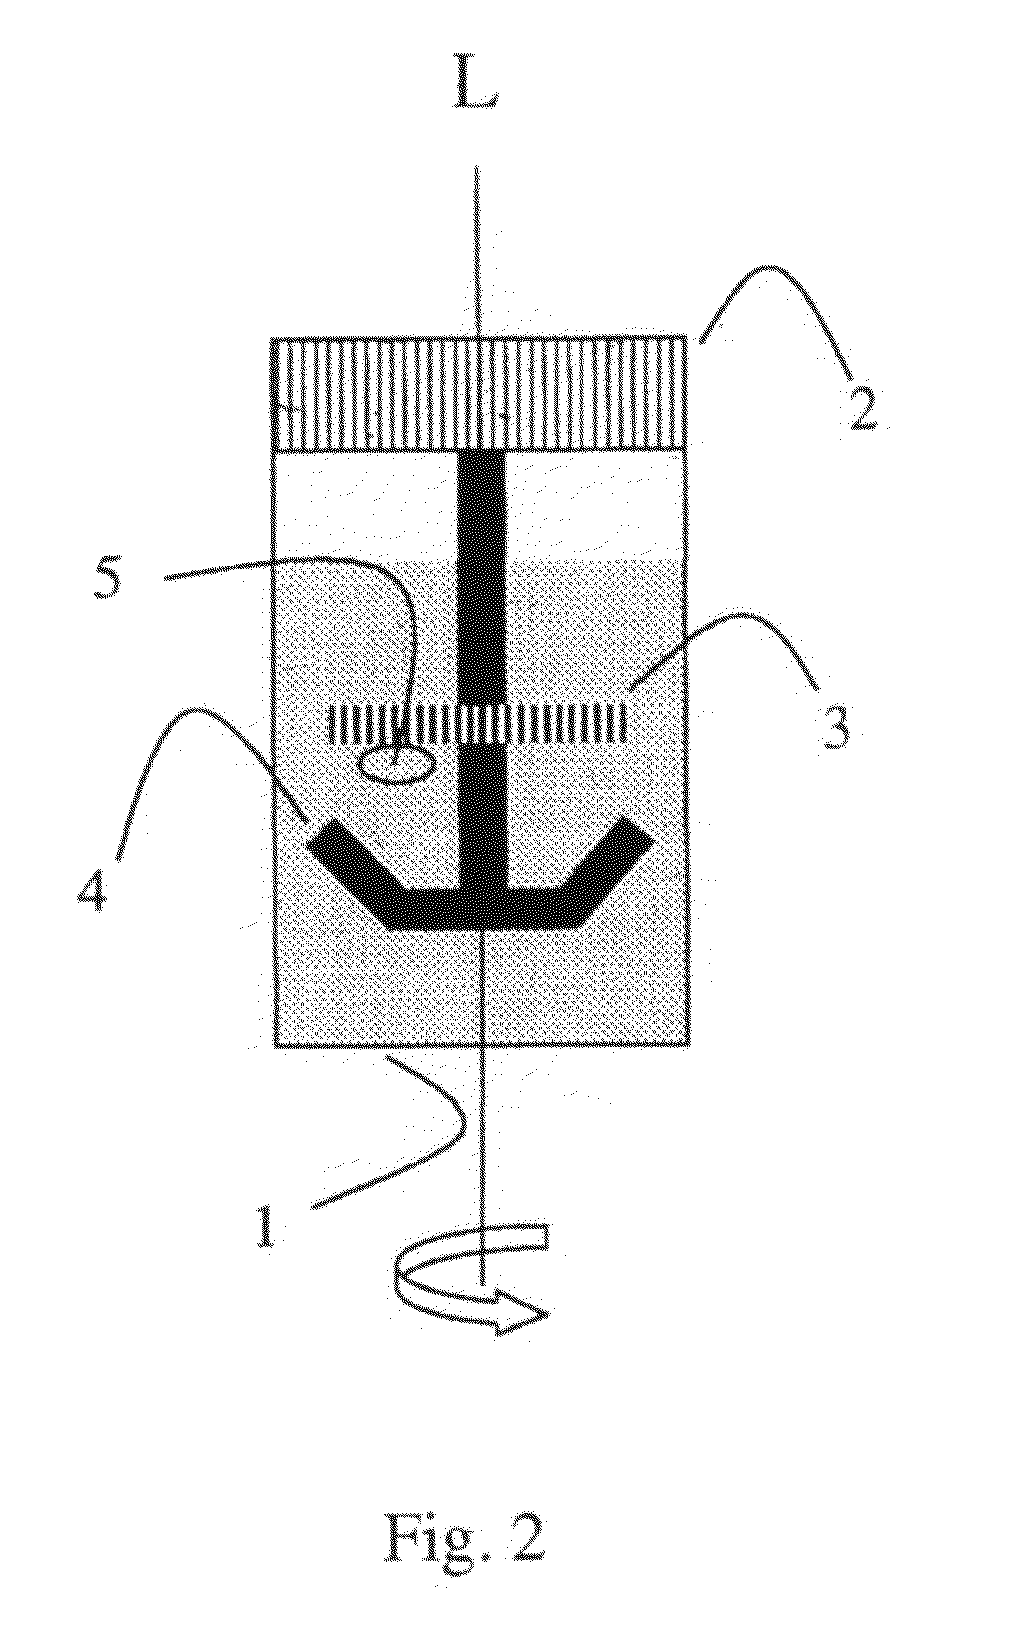 Method for treating a biological sample with a composition containing at least one polyol and excluding water